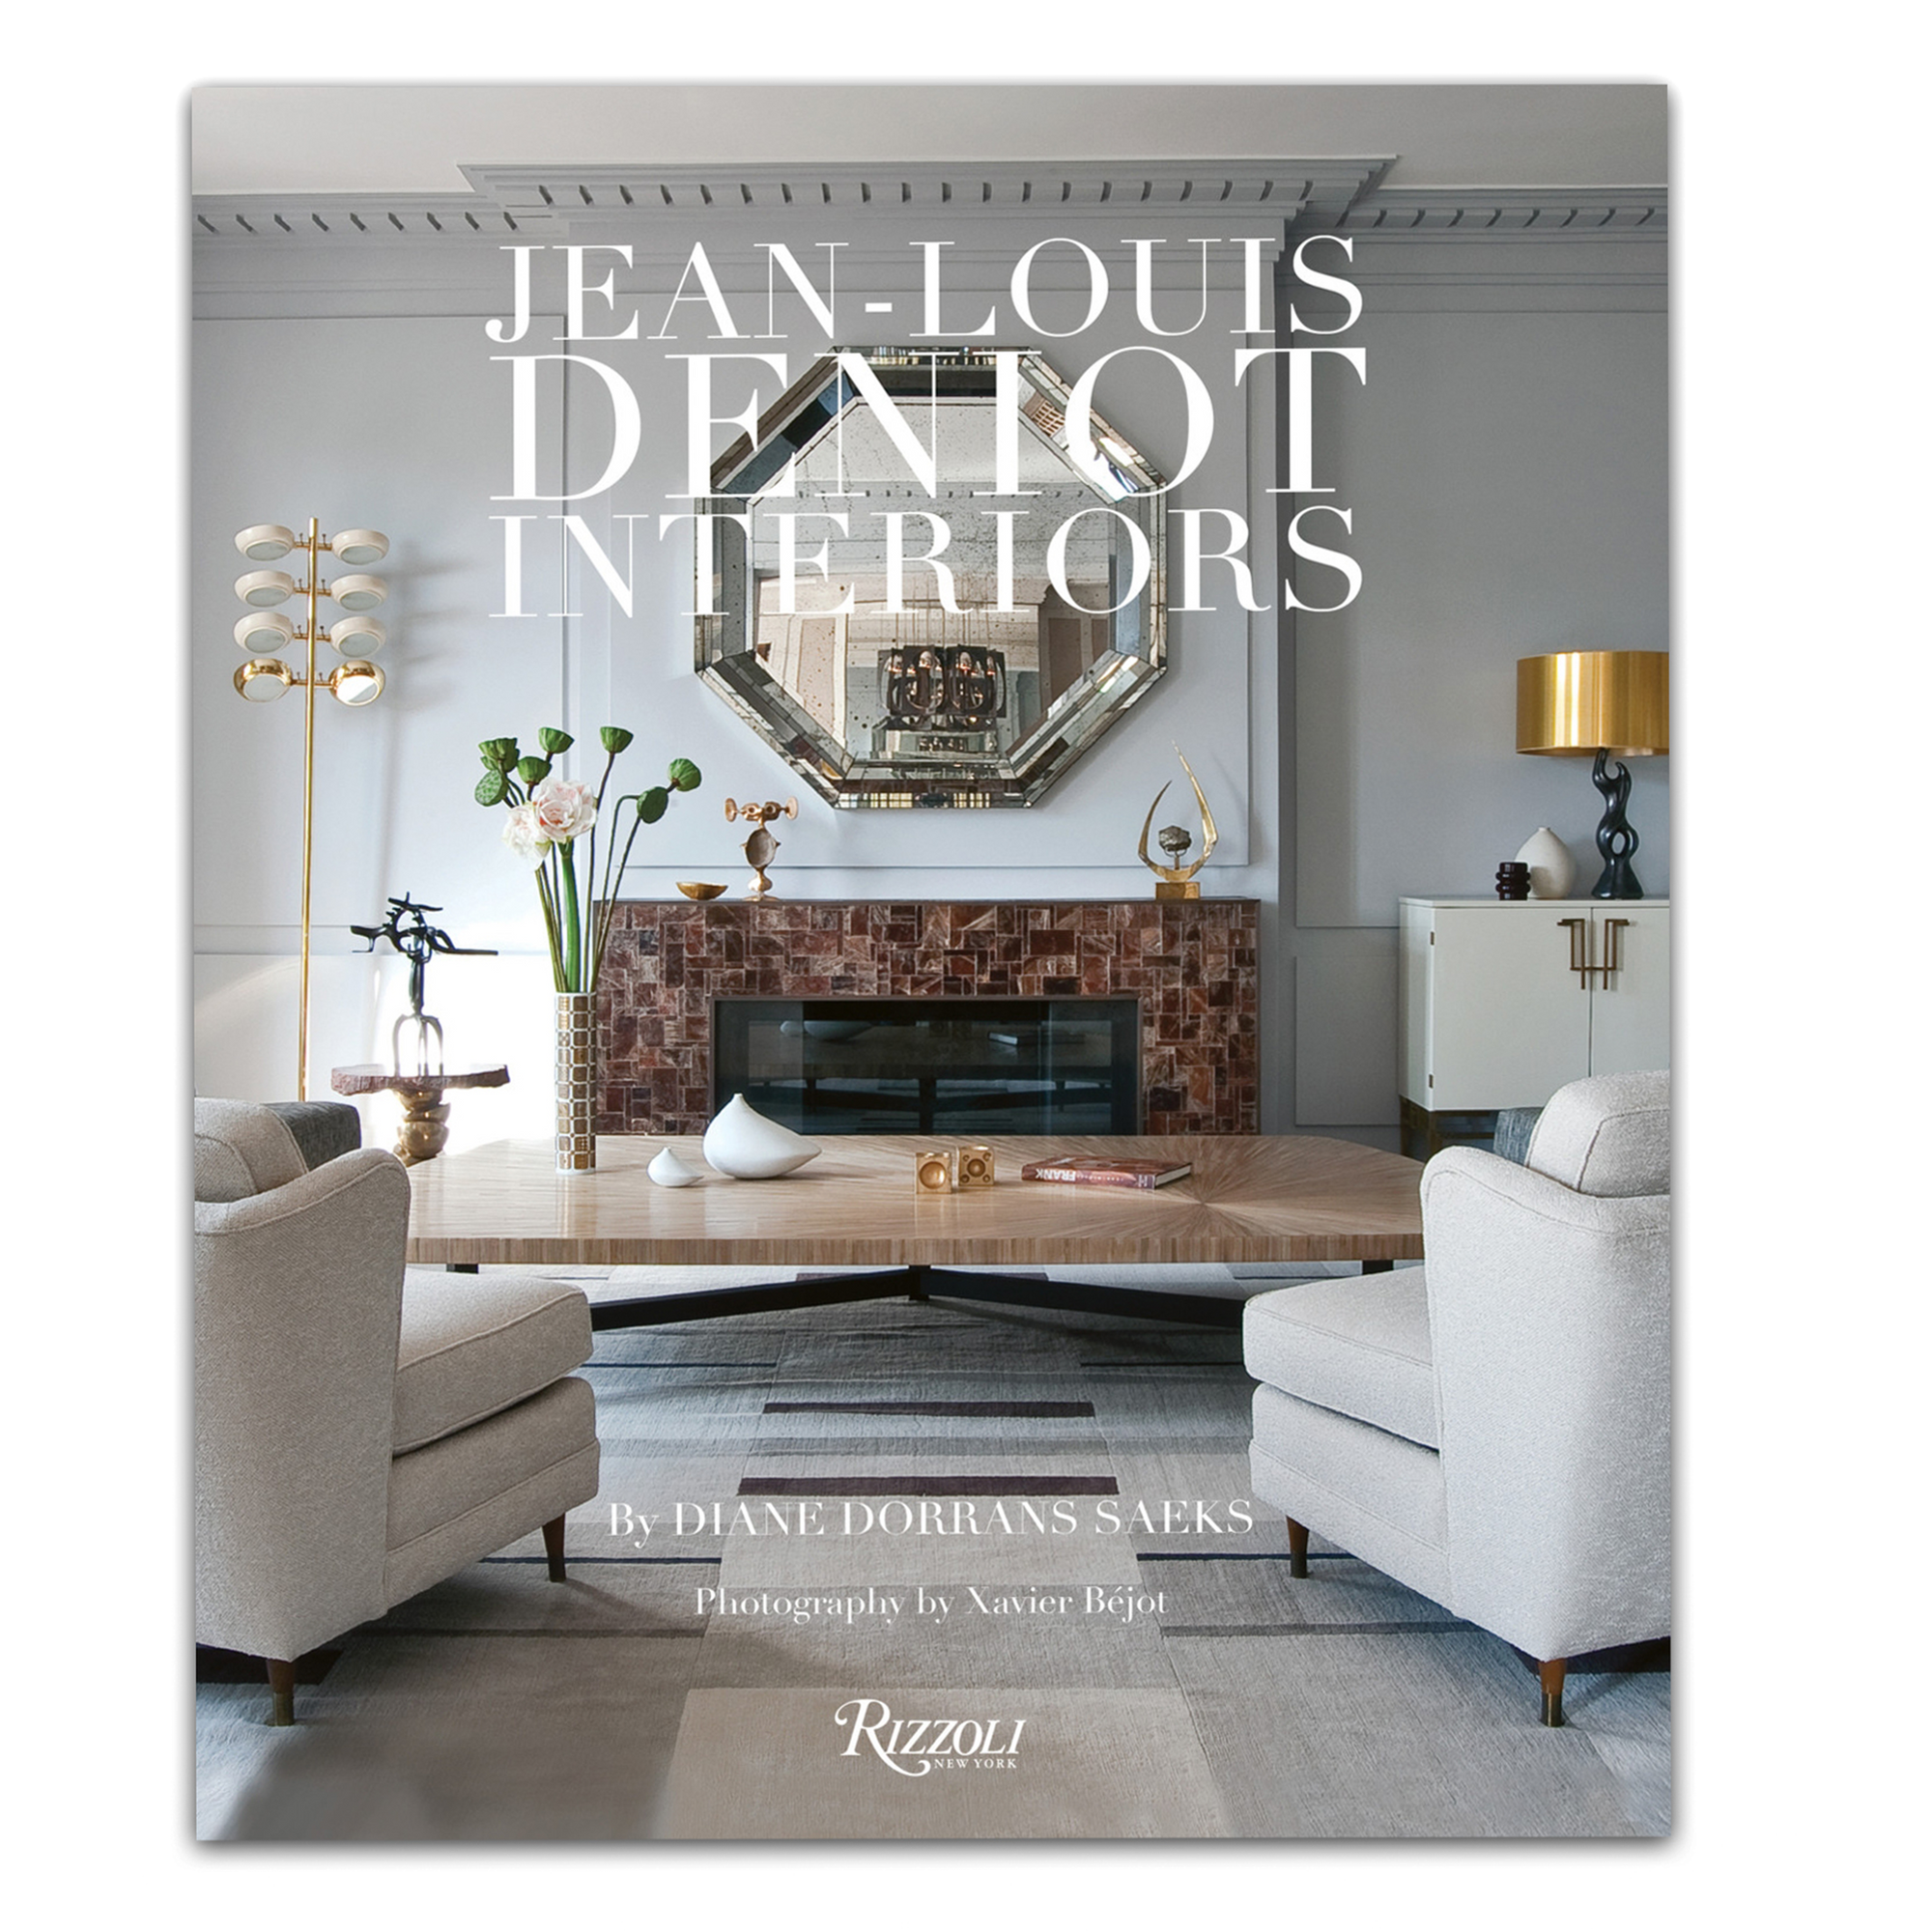 The first book on the work of a designer whose refined classical interiors are widely desired and emulated as the epitome of French style.